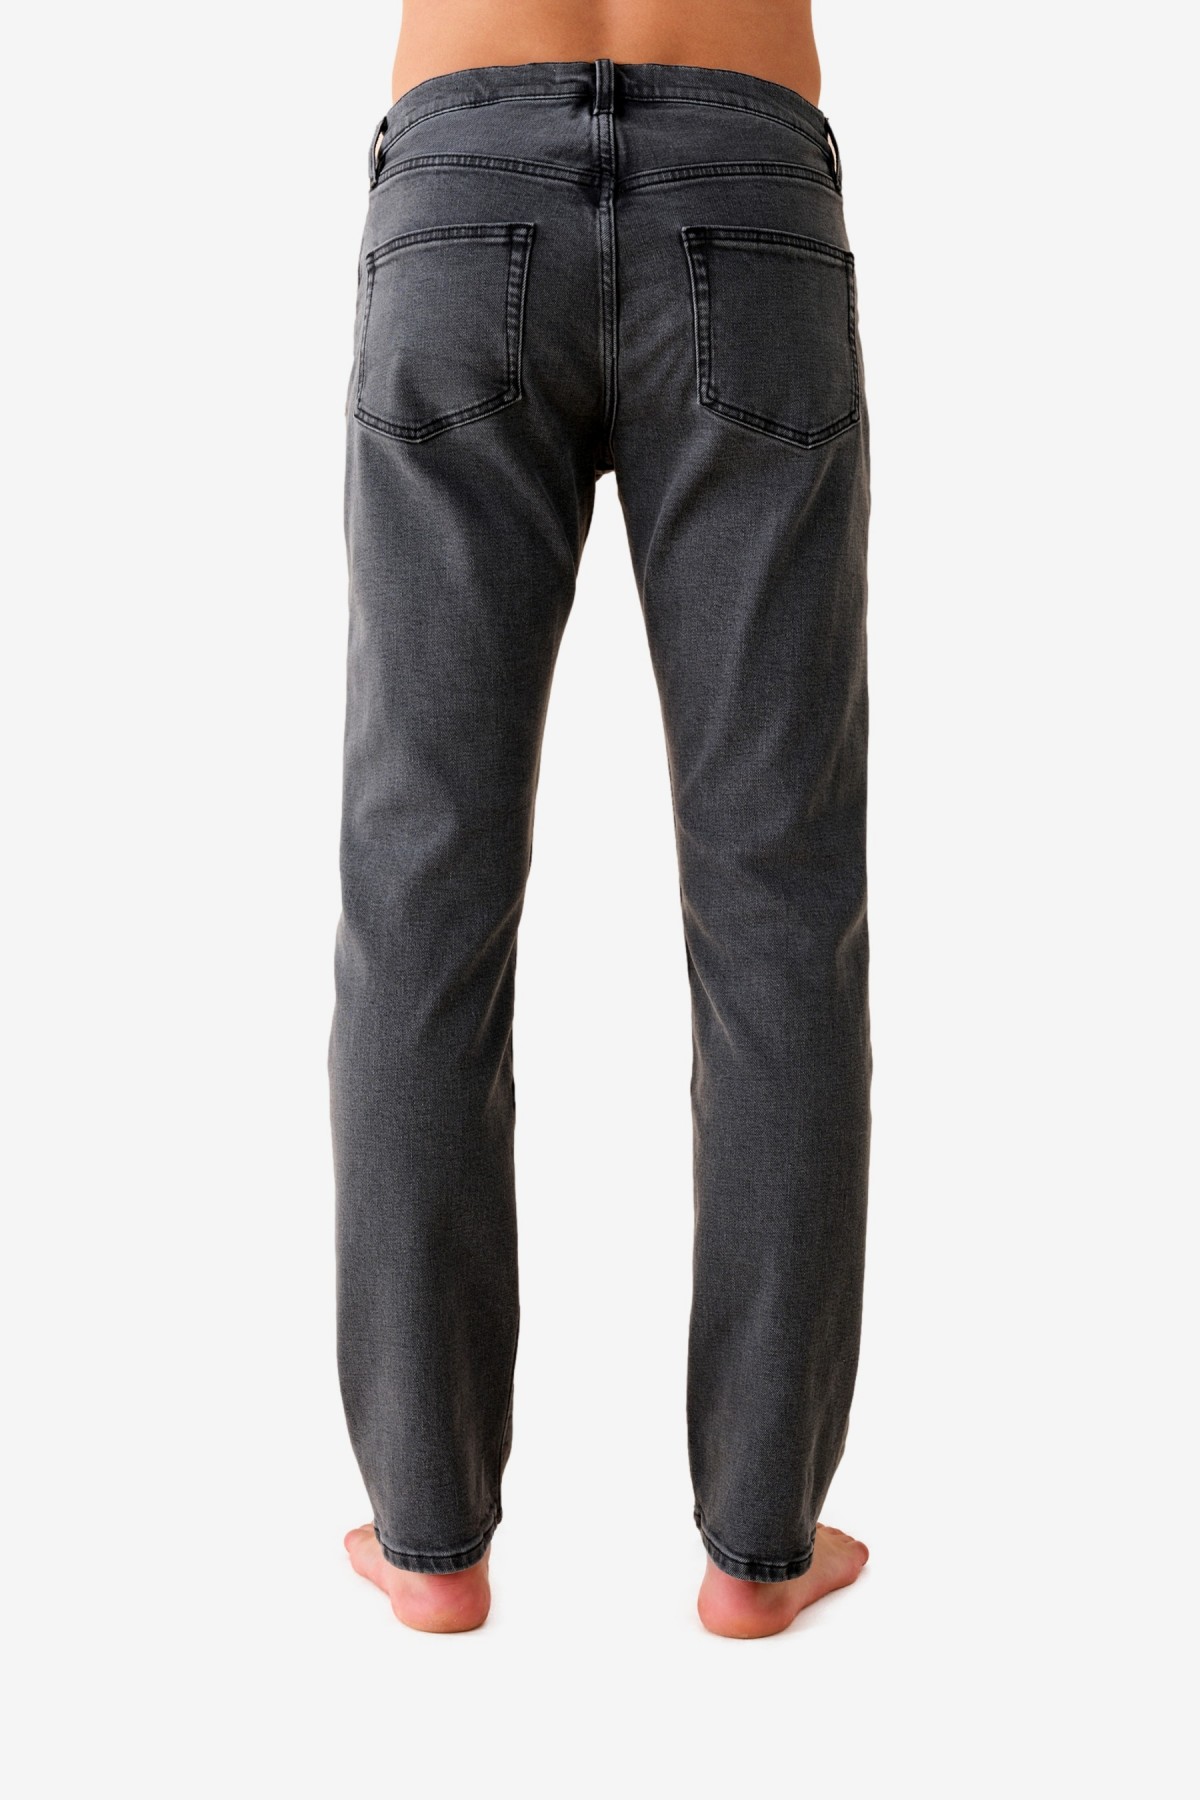 Jeanerica TM005 Tapered Jeans in Soft Grey